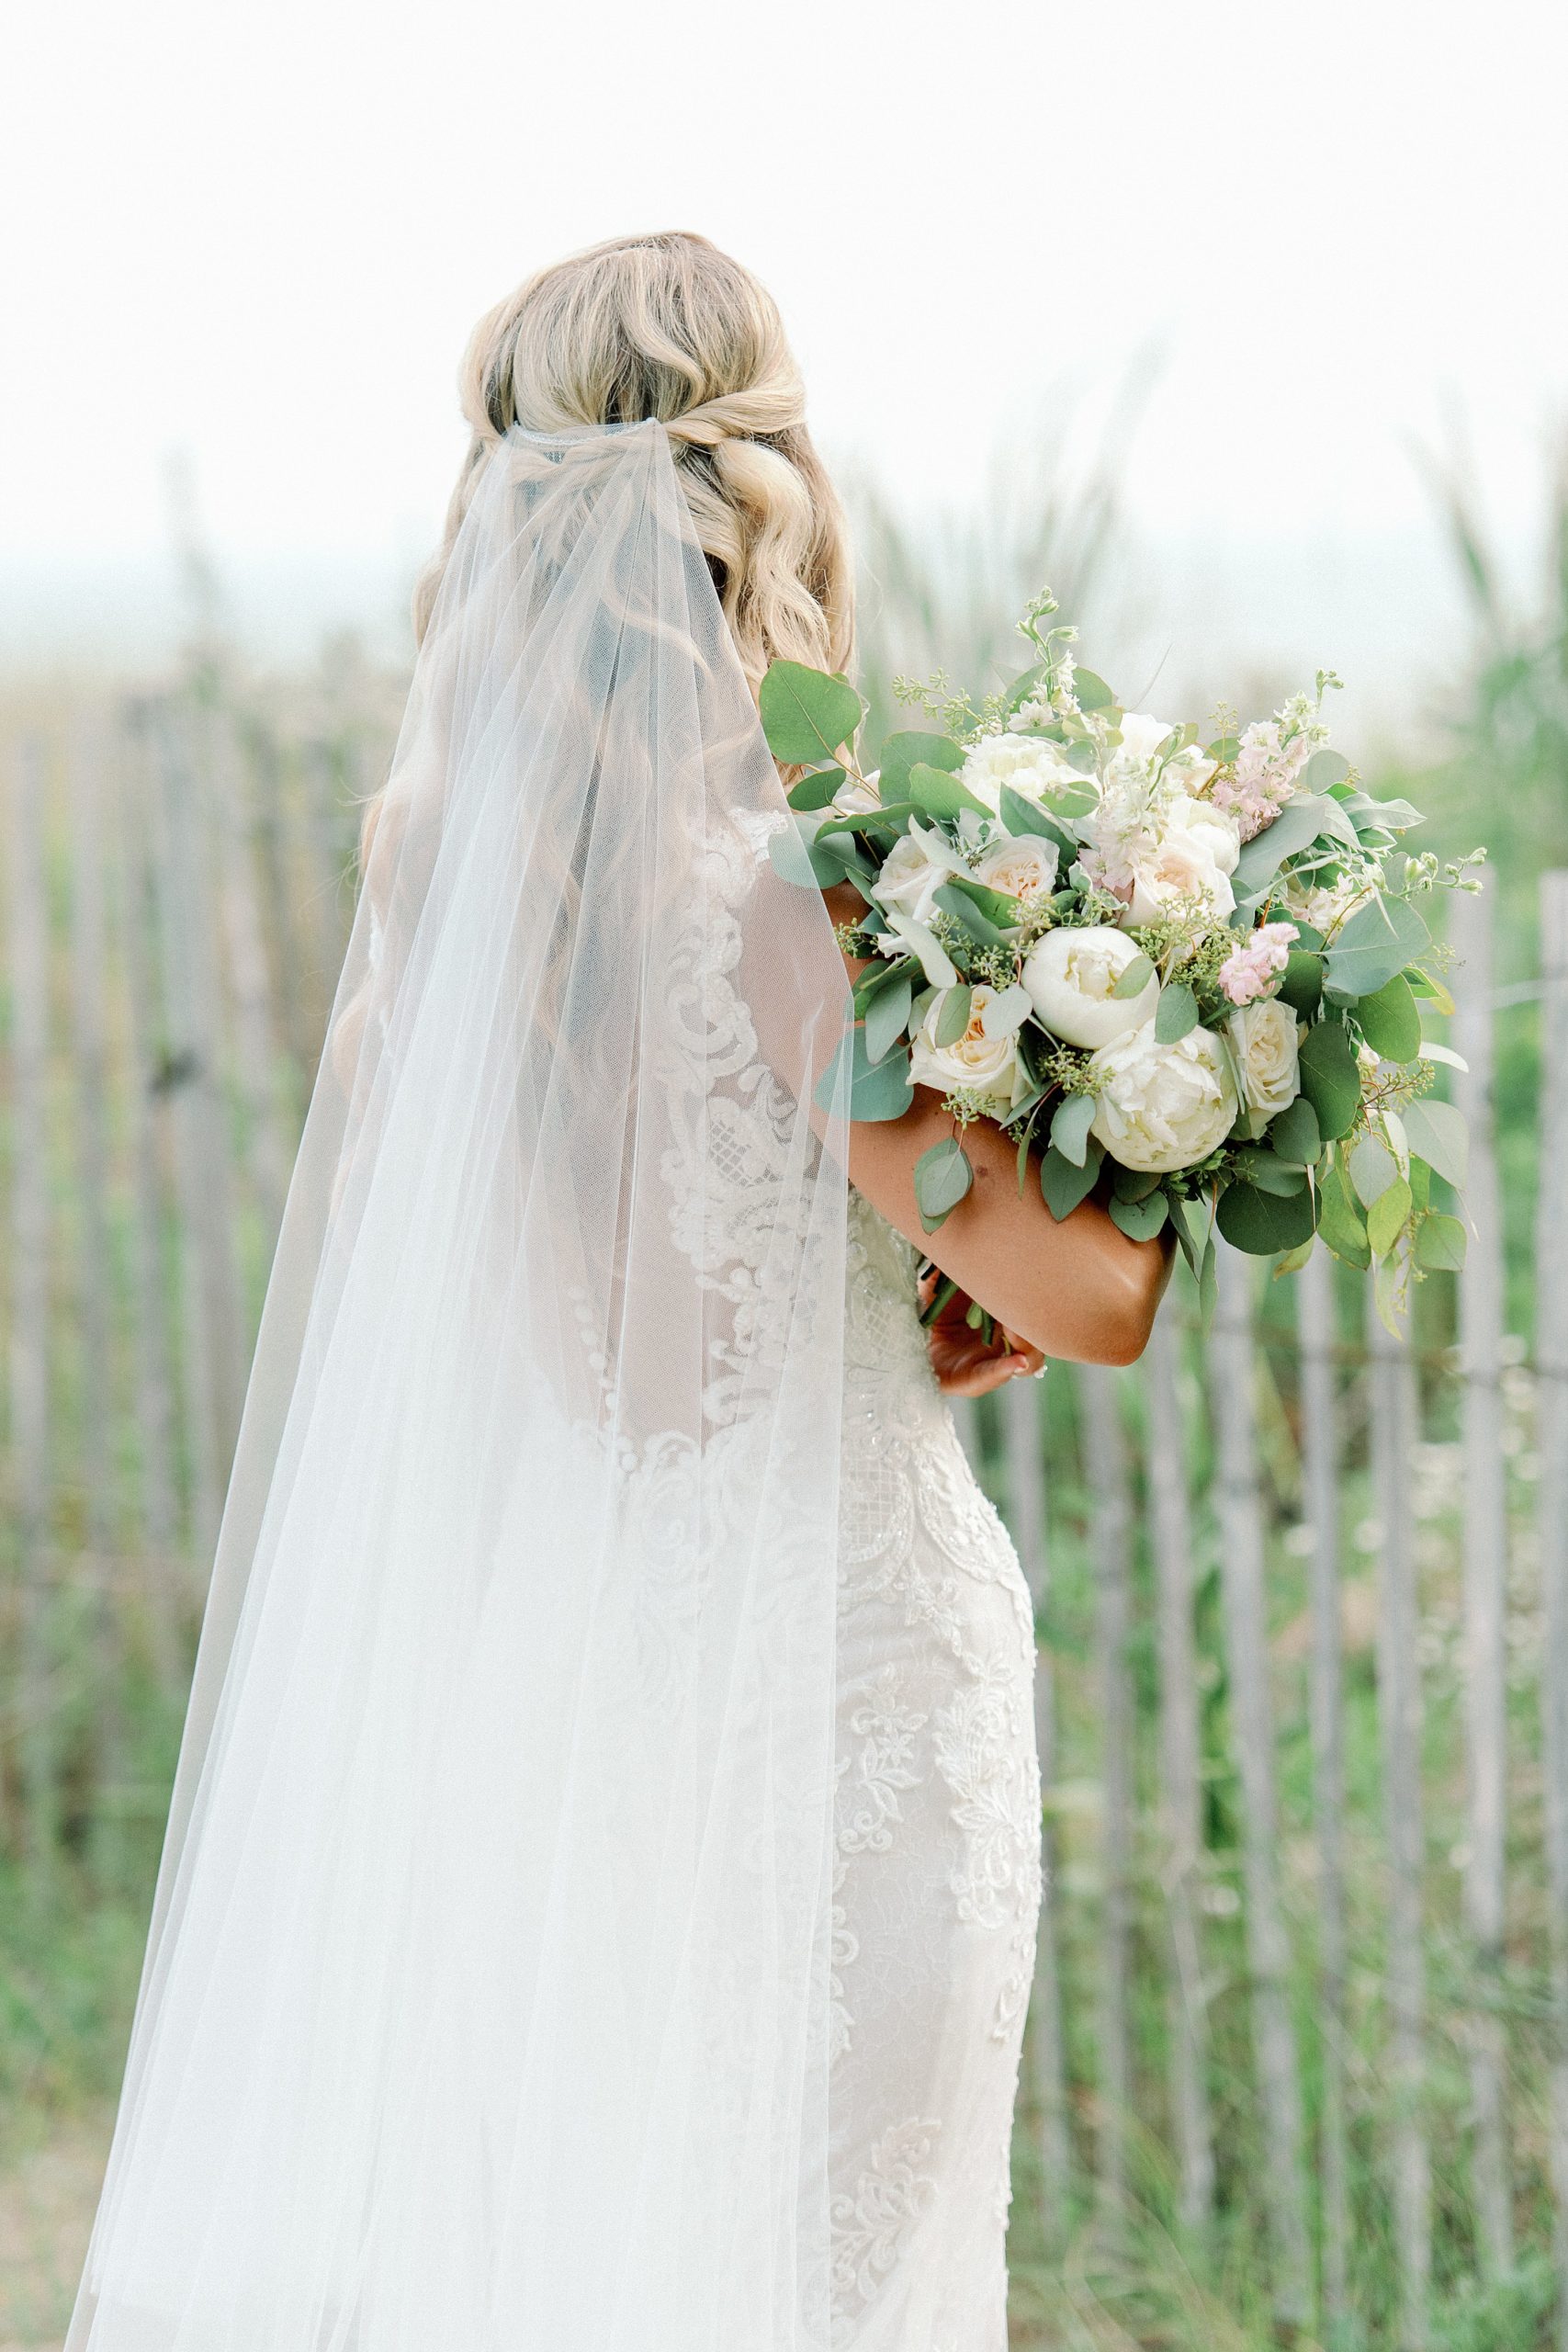 bridal gown and bouquet details with flowing veil